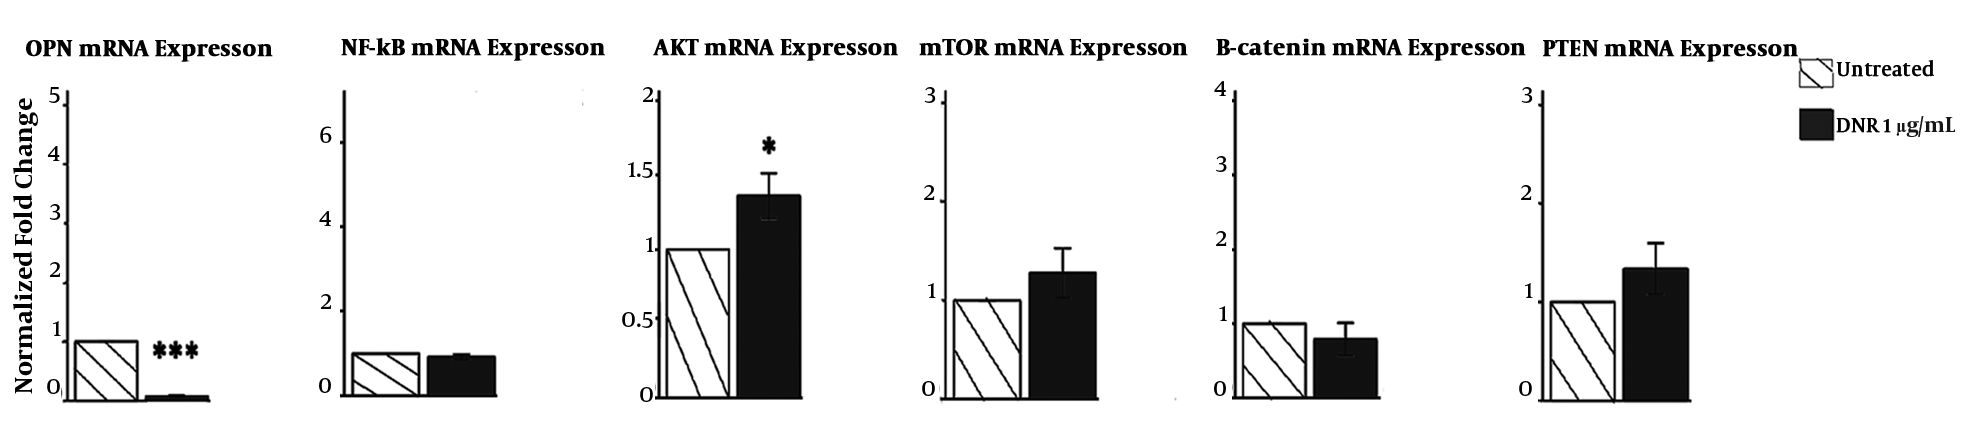 The transcriptional profile by qrt - PCR presented that DNR decreases the mRNA expression of OPN, but not NF - kB/RelB, AKT1, mTOR, β - catenin, or Pten. The graphs represent 3 independent experiments (mean ± SD). *P &lt; 0.05, **P &lt; 0.01, ***P &lt; 0.001 (compared with control or comparisons depicted).